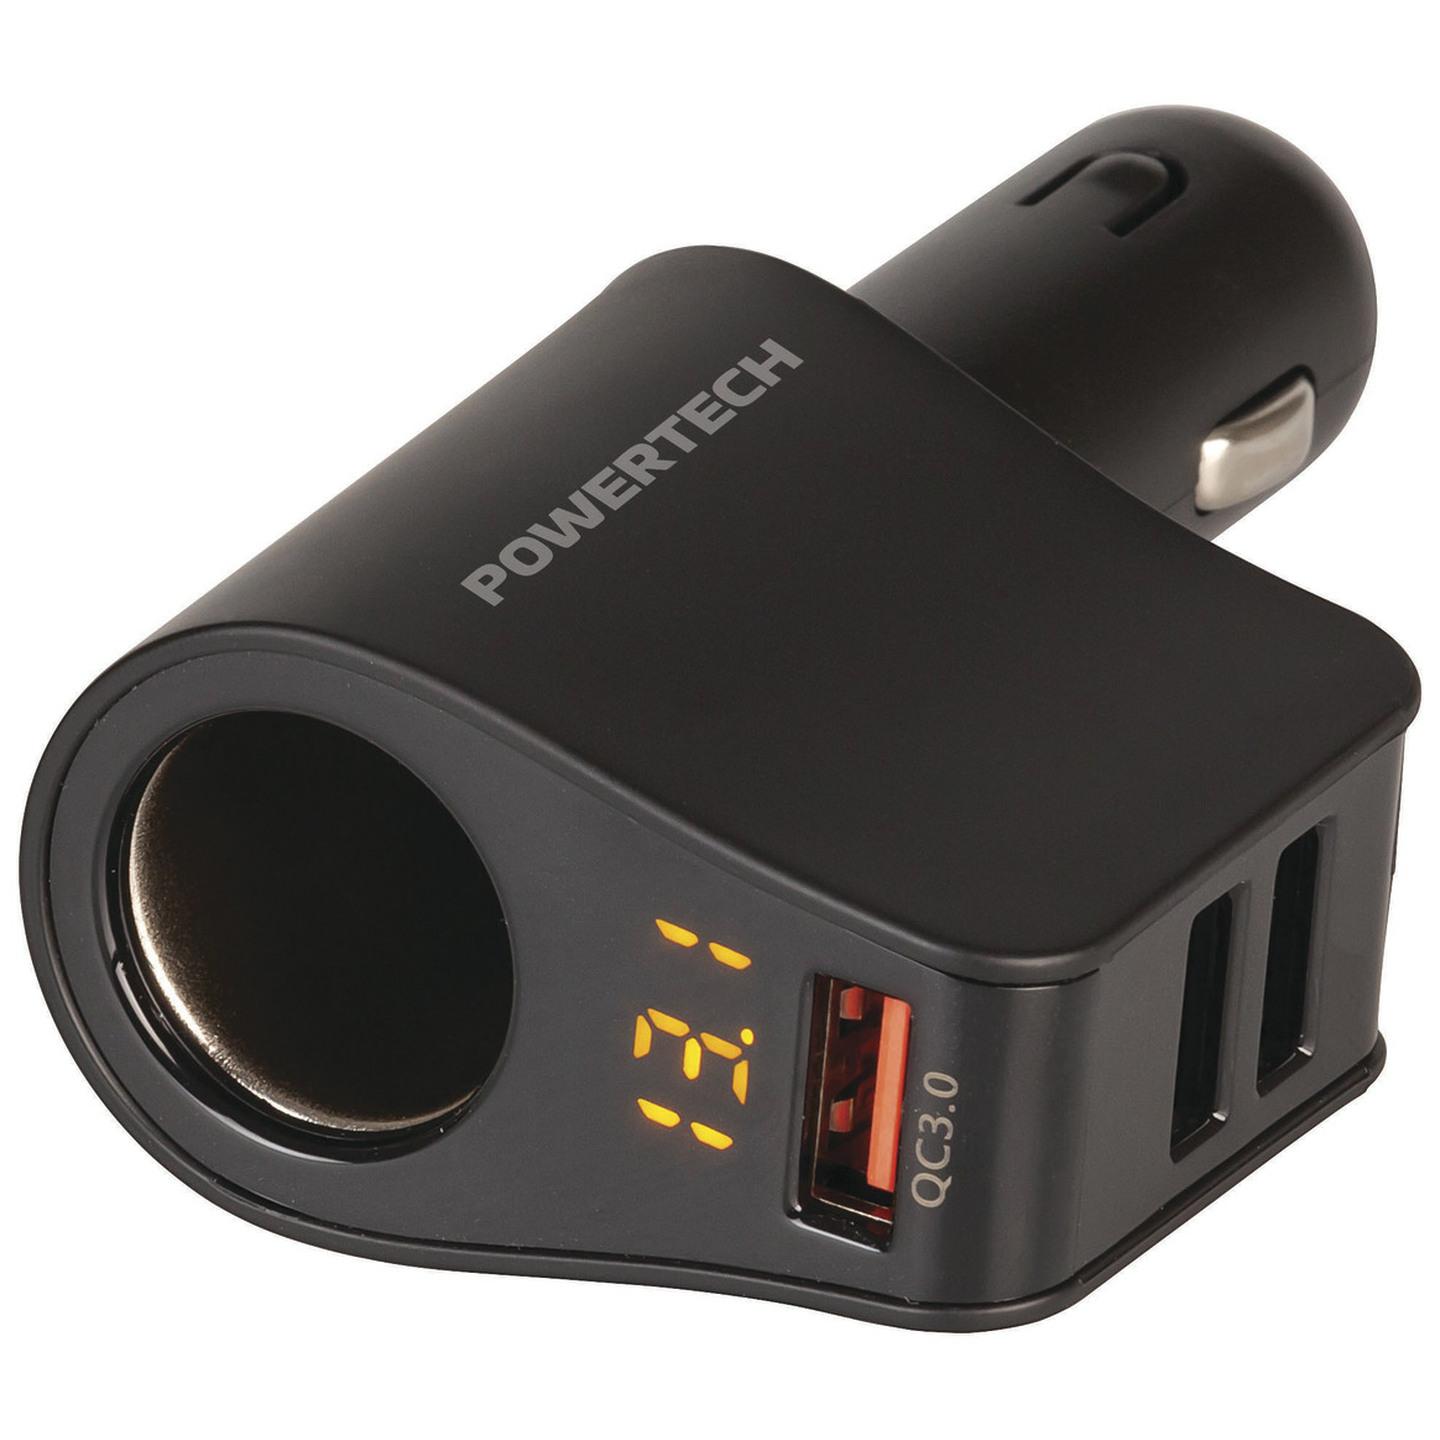 Car Cigarette Lighter Adaptor with 3 USB Charging Ports and Voltmeter